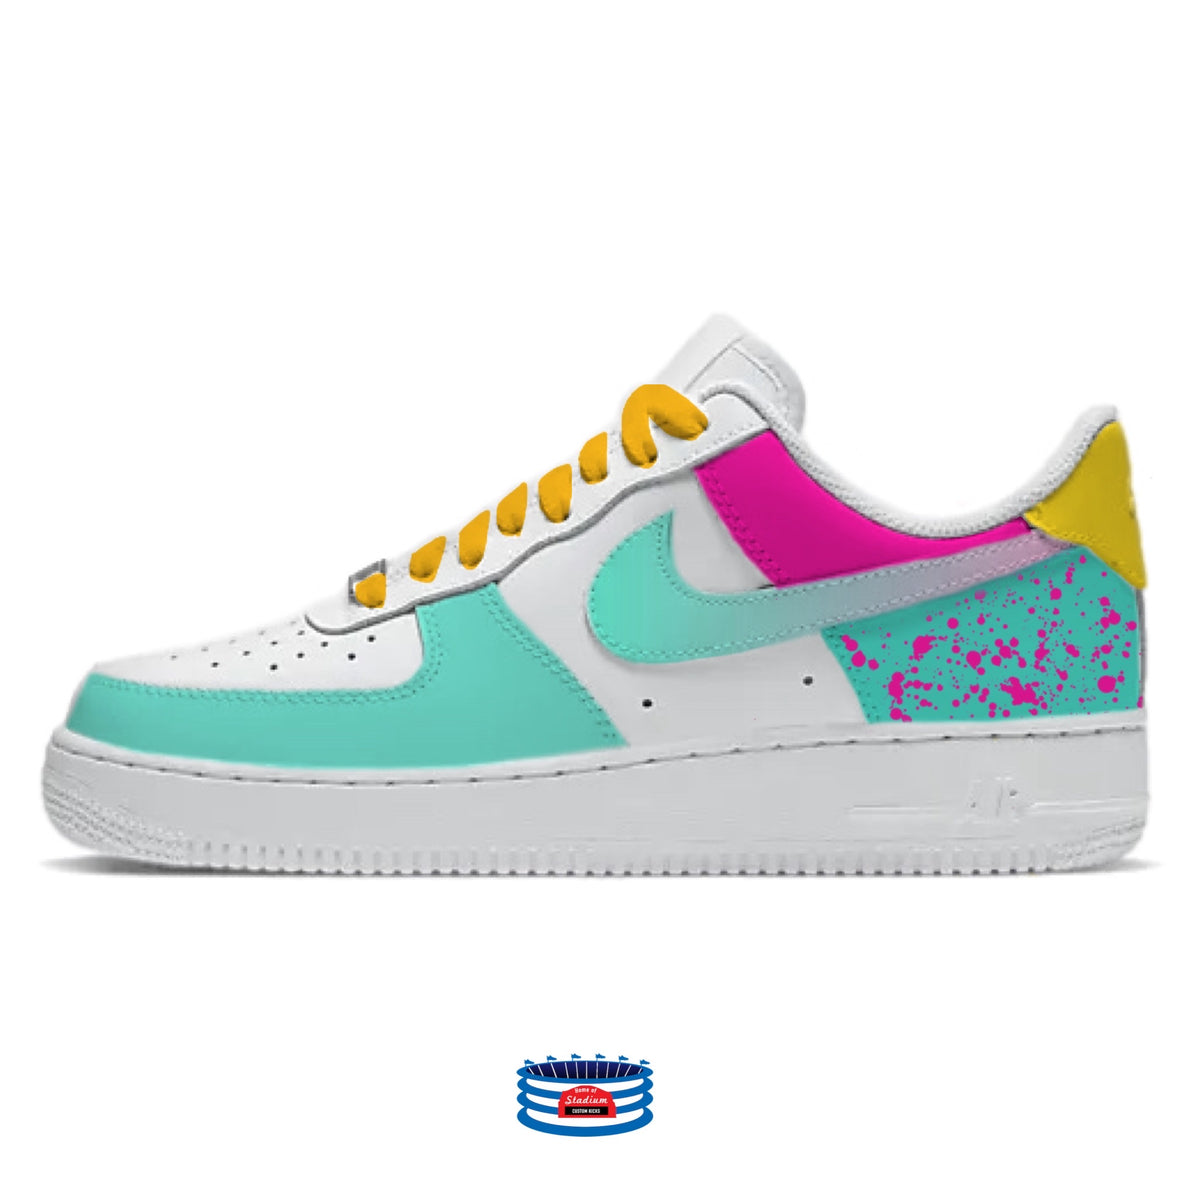 San Diego Nike Air Force 1 Low Shoes